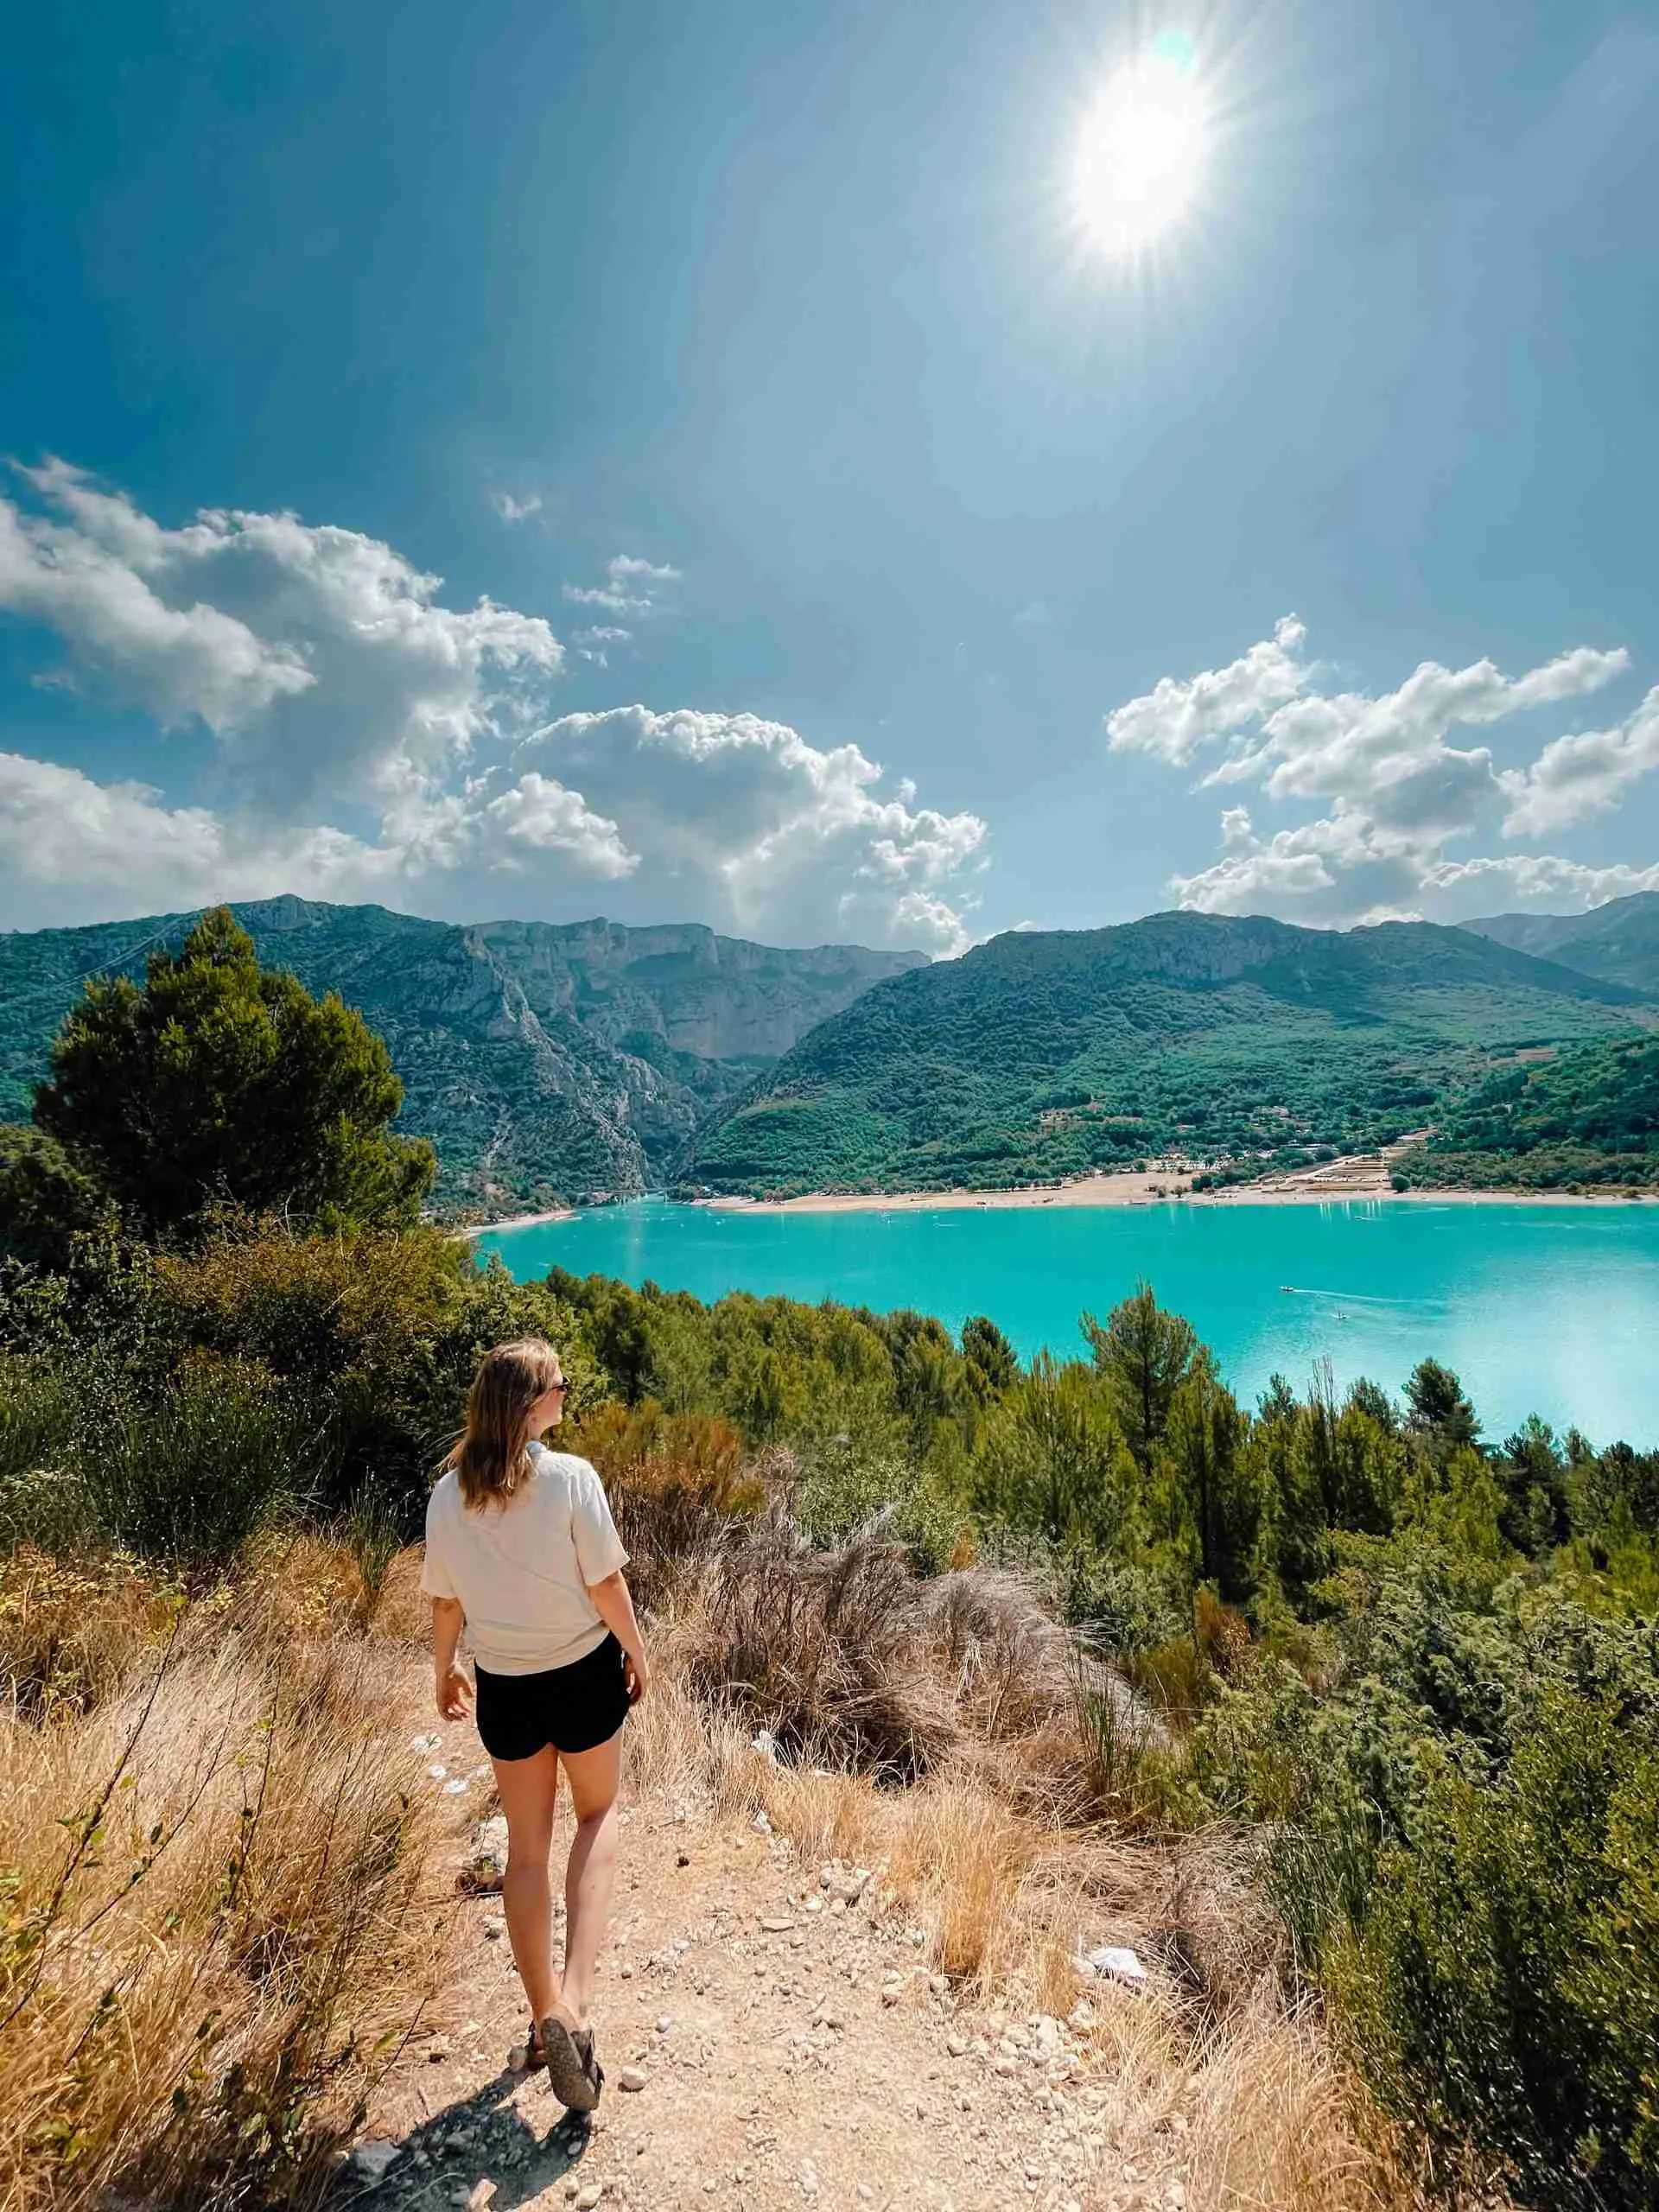 A girl is walking and admiring the view overlooking the lake beside the Gorges du Verdon 